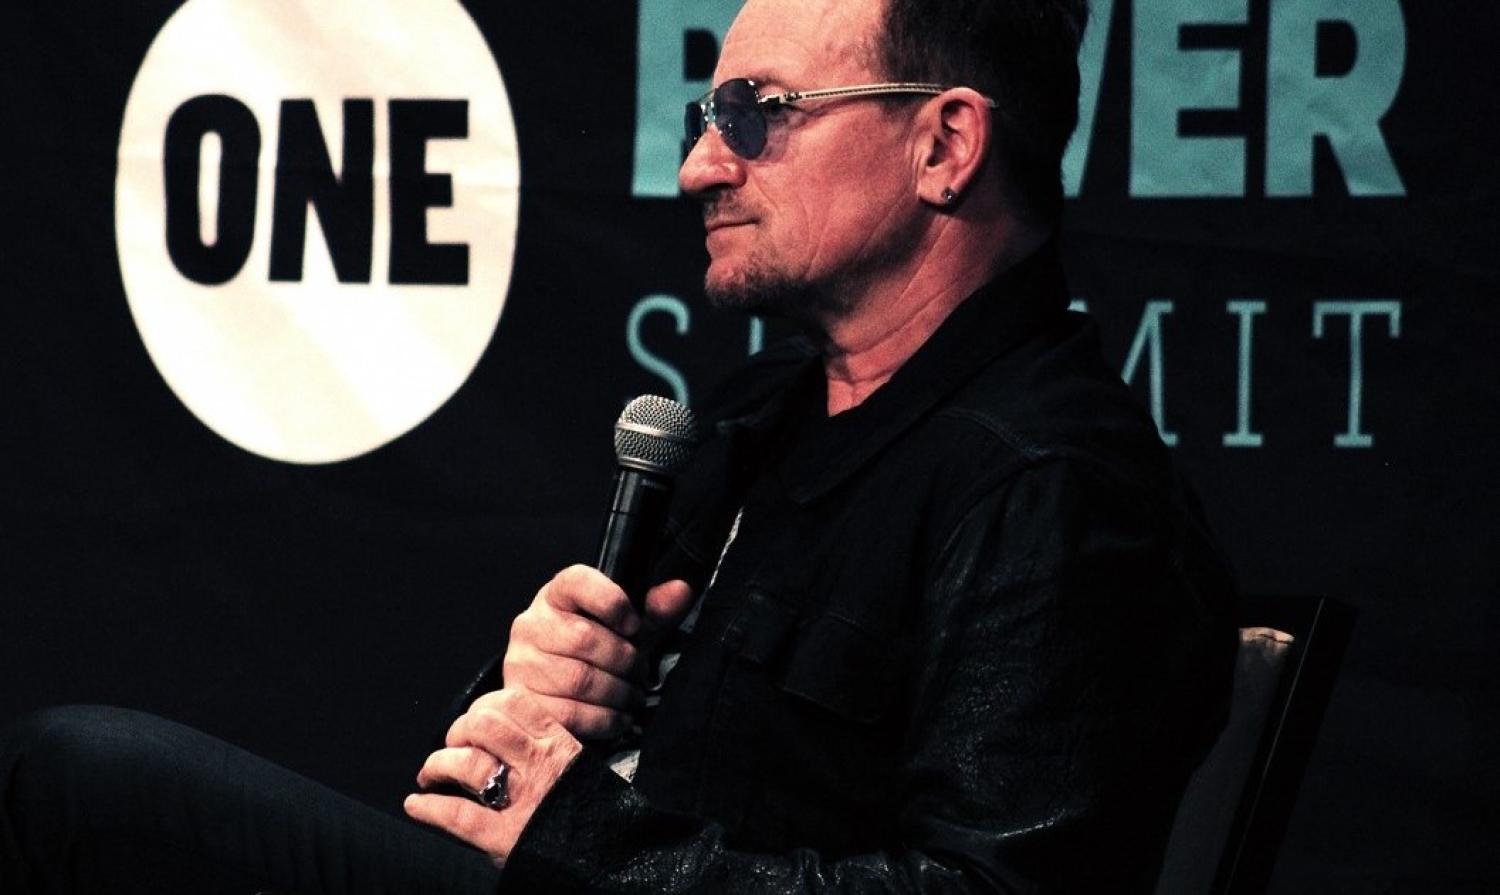 Bono at One Power summit (Photo: James Townsend/Flickr)